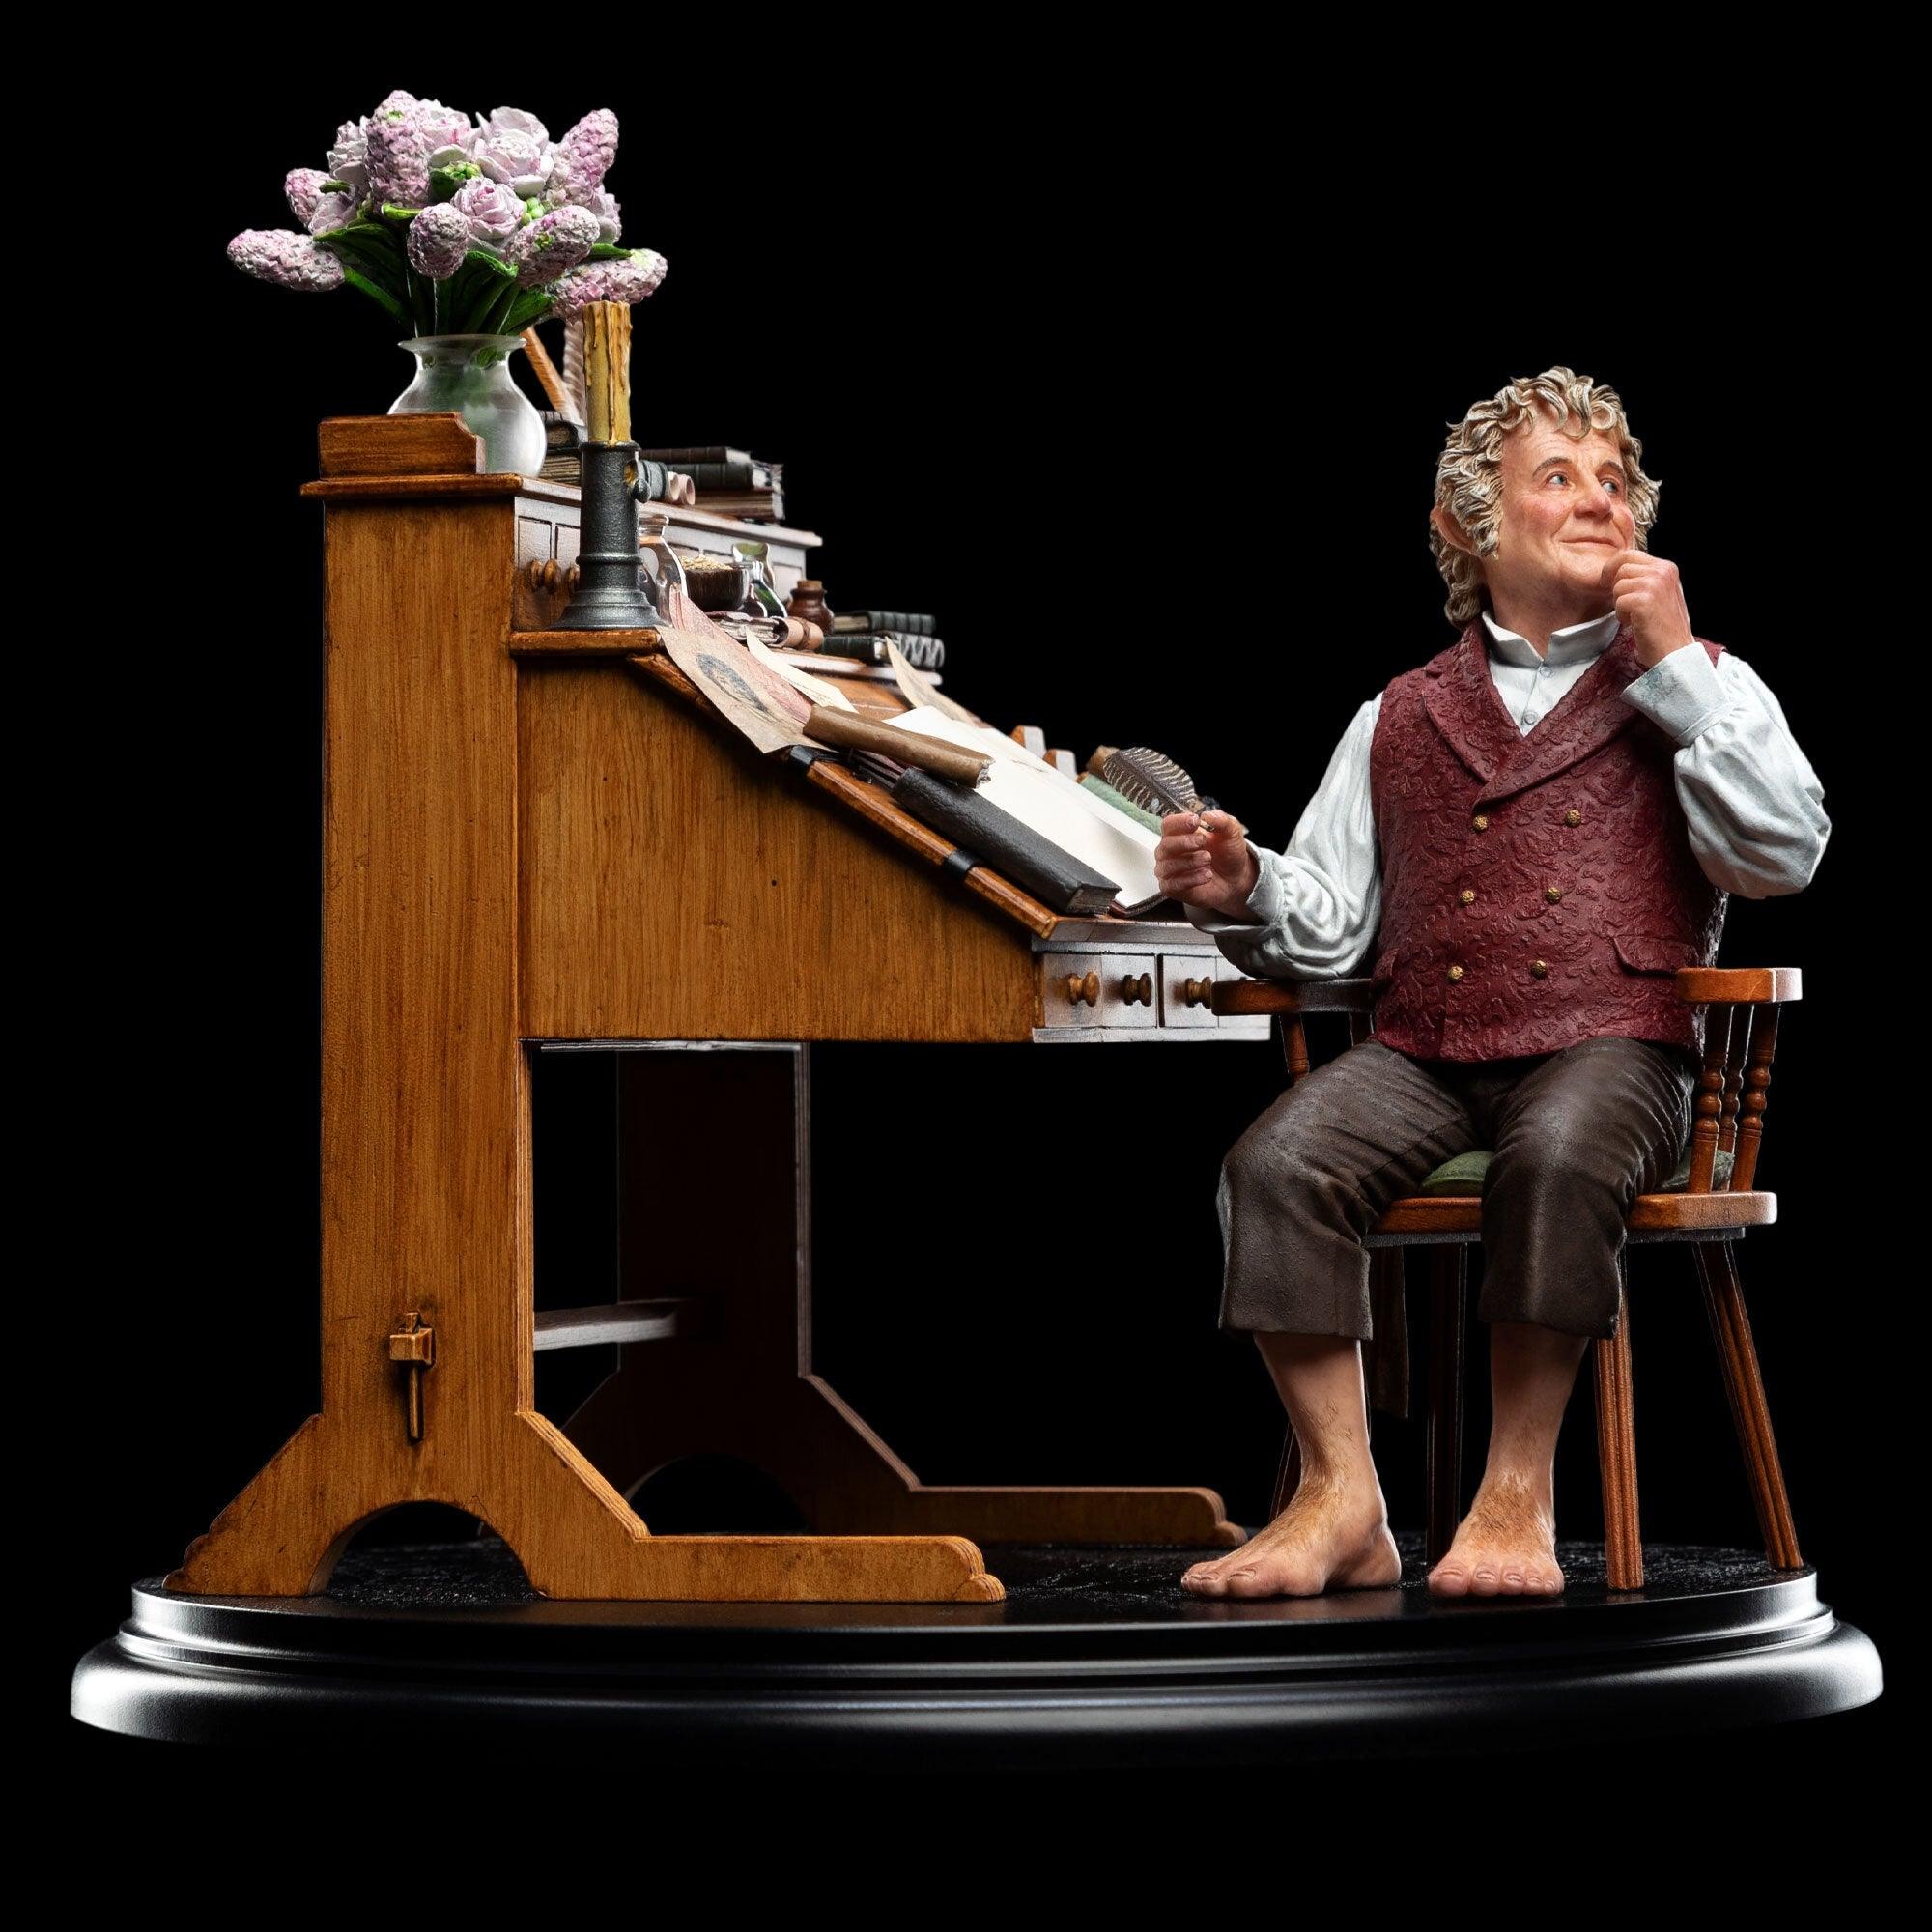 WET03756 The Lord of the Rings - Bilbo Baggins at his desk Classic Series 1:6 Scale Statue - Weta Workshop - Titan Pop Culture